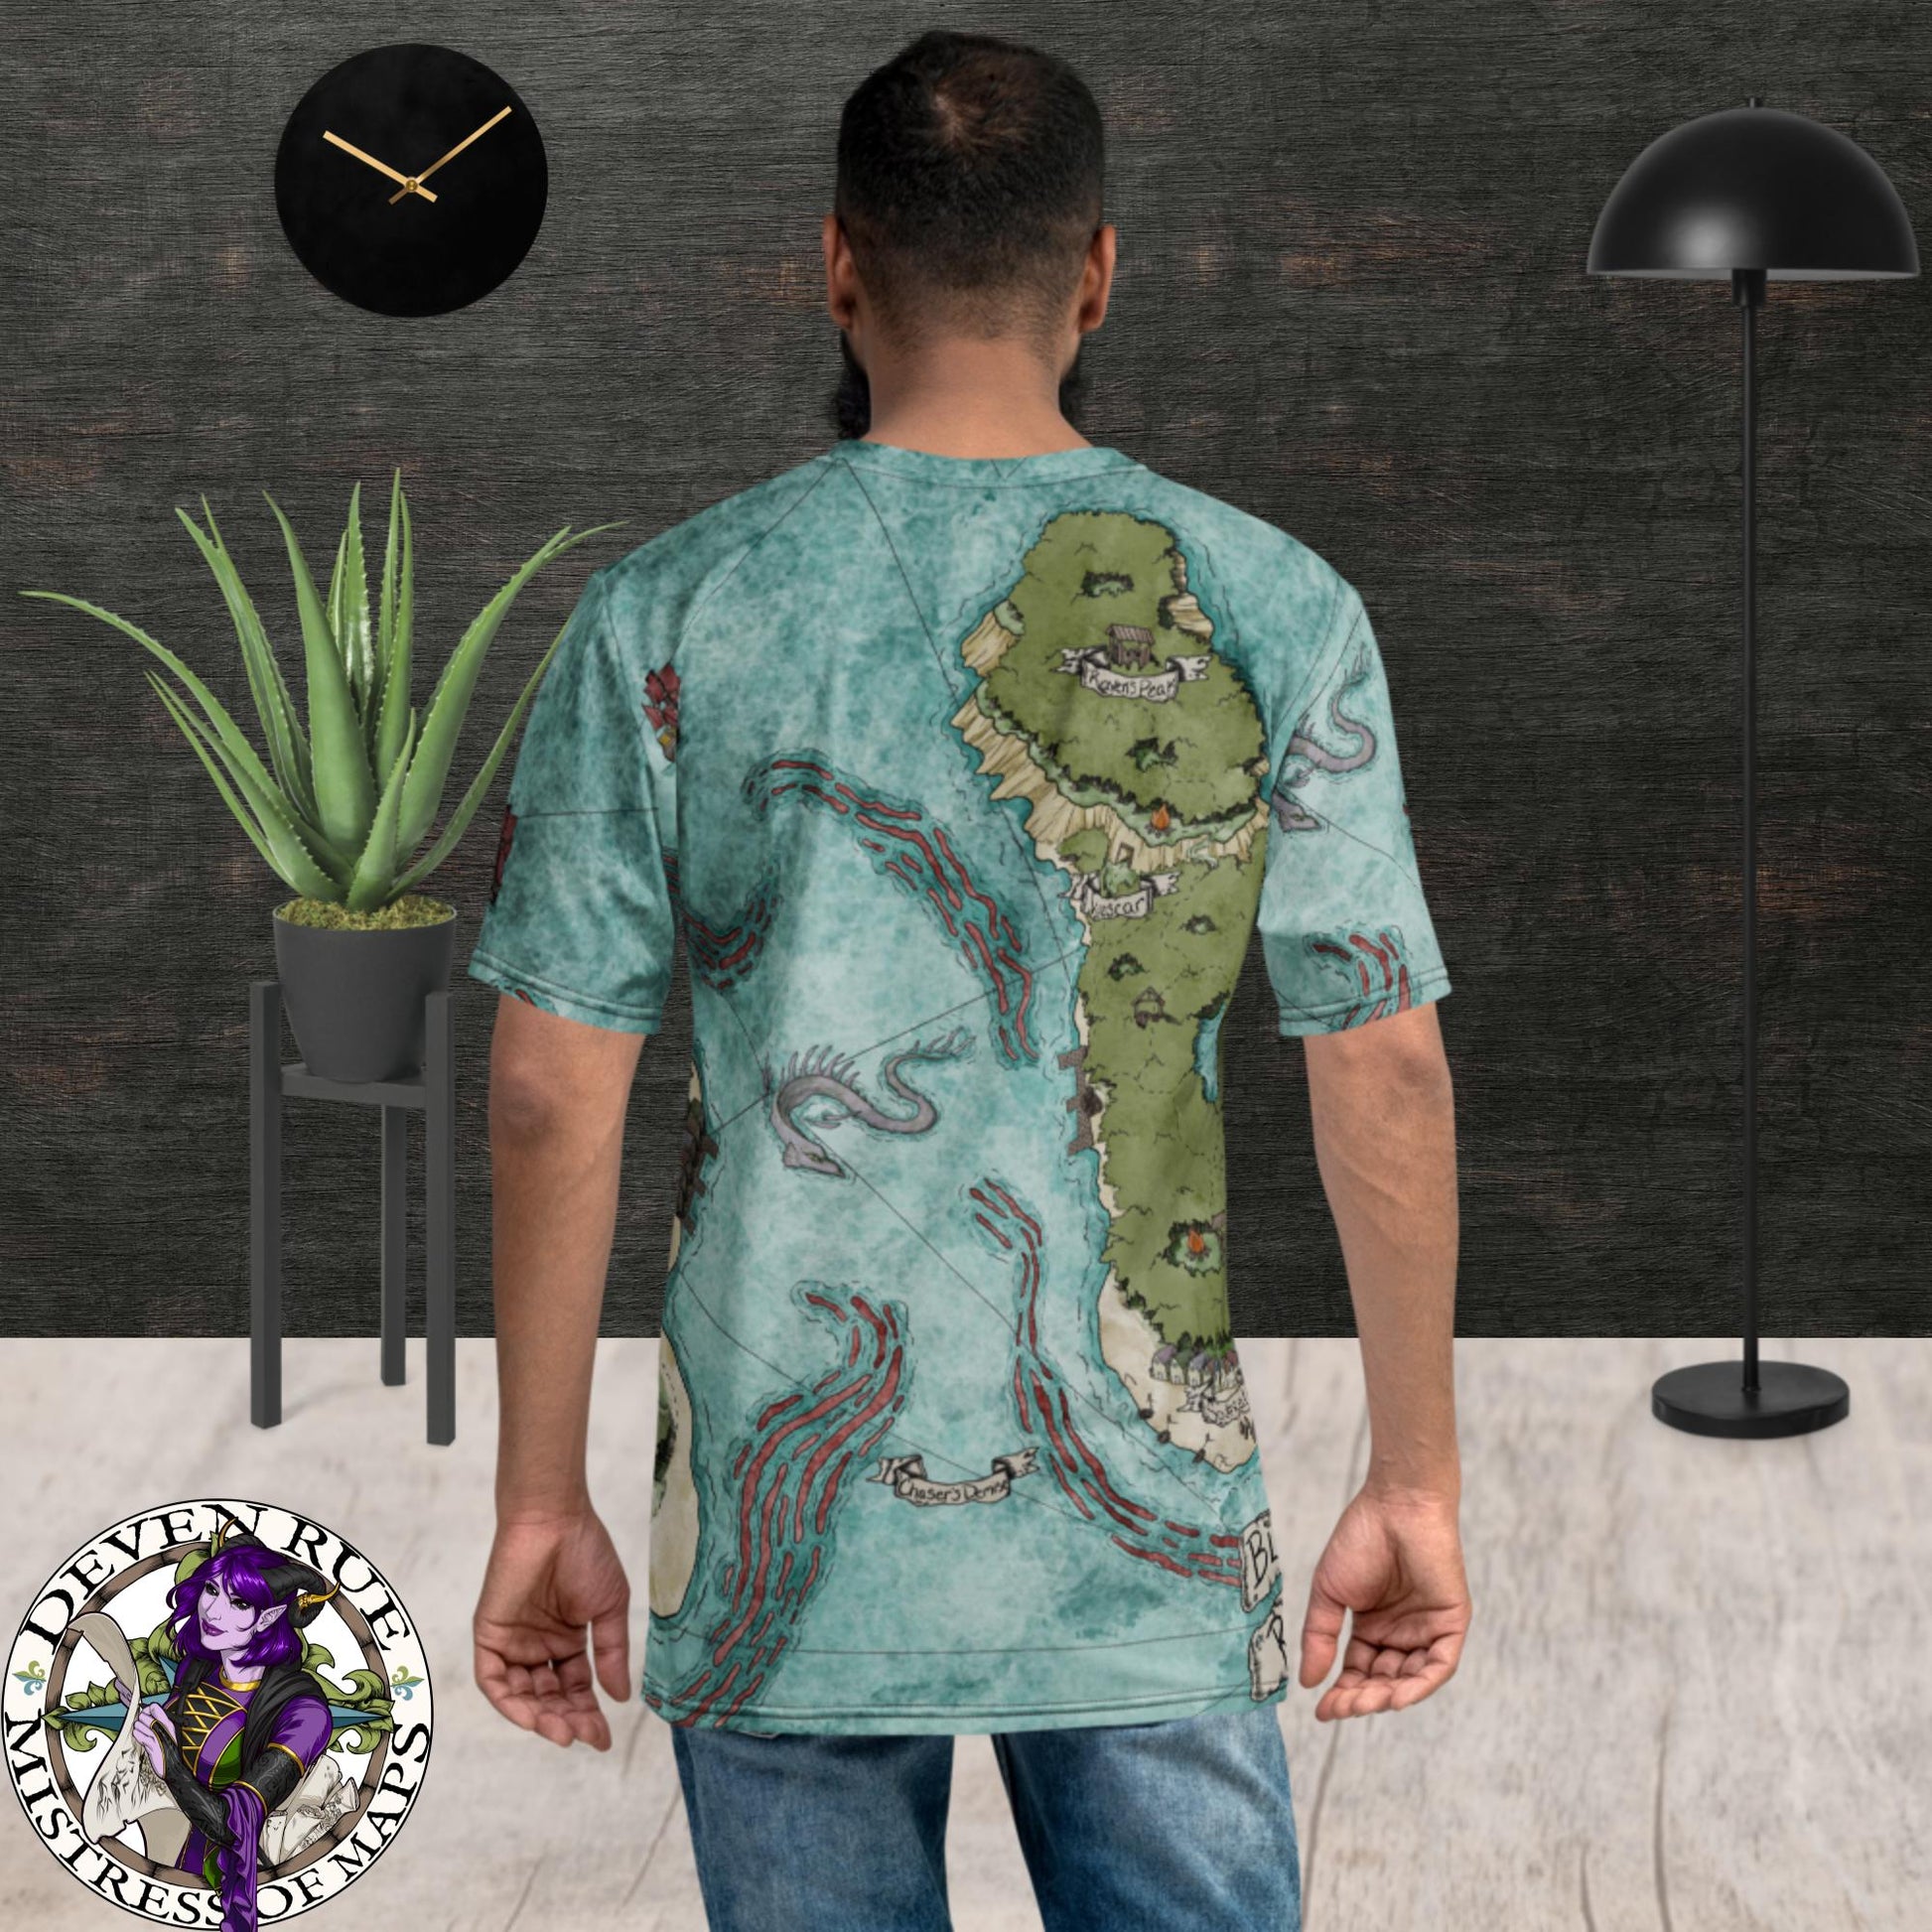 Back view of the Blood Reef Isle tee shirt.